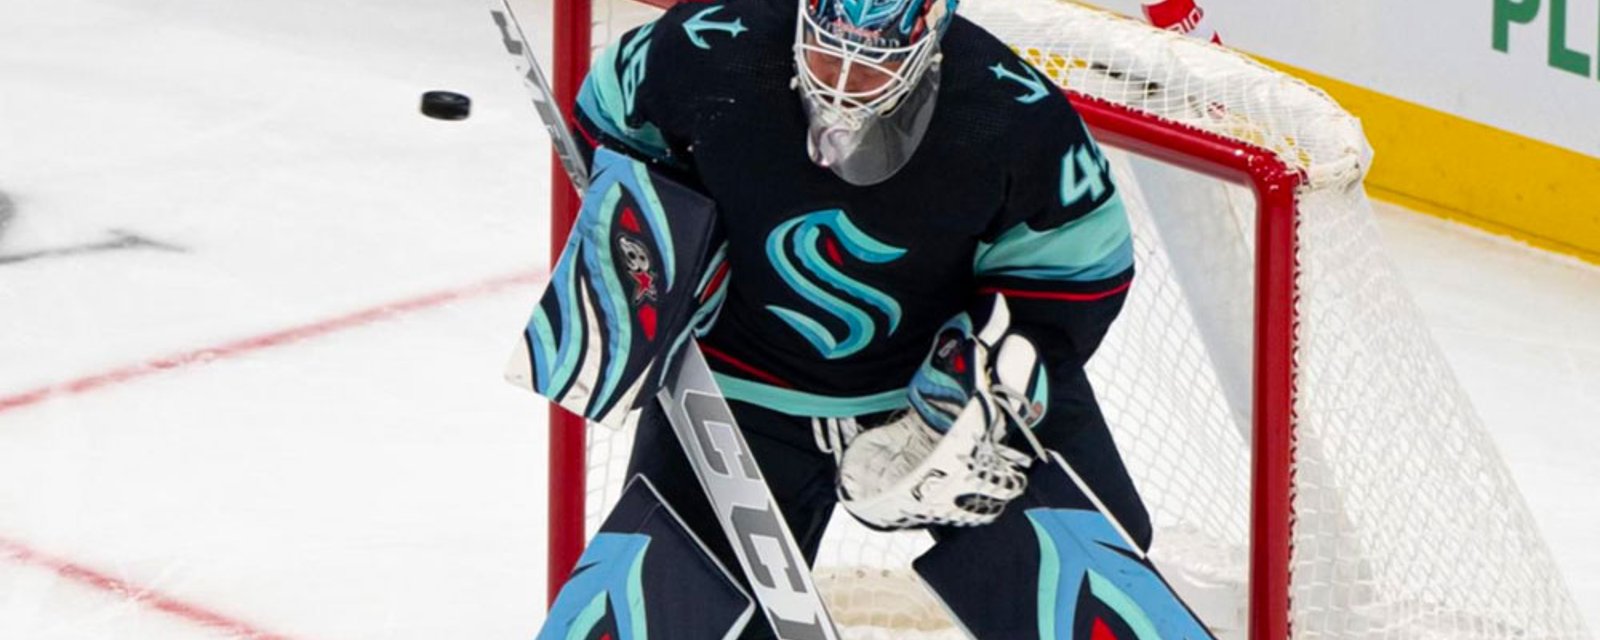 The NHL goalie carousel continues on the waiver wire today